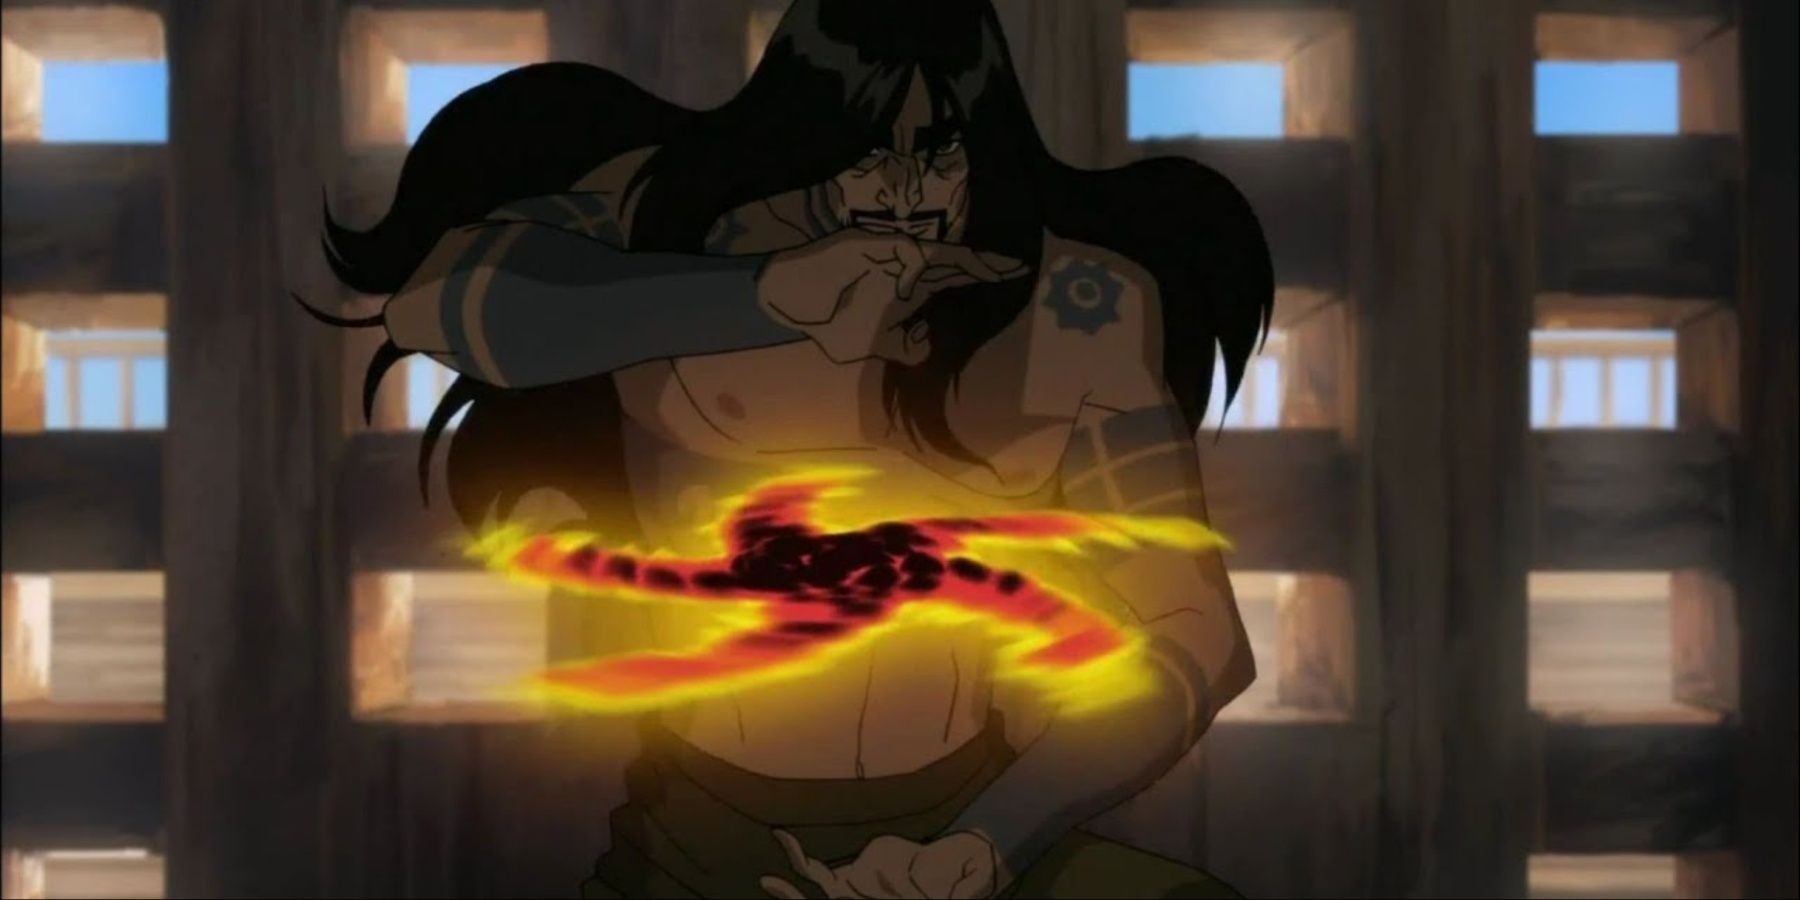 Ghazan Using His Lavabending To Escape Prison In The Legend Of Korra